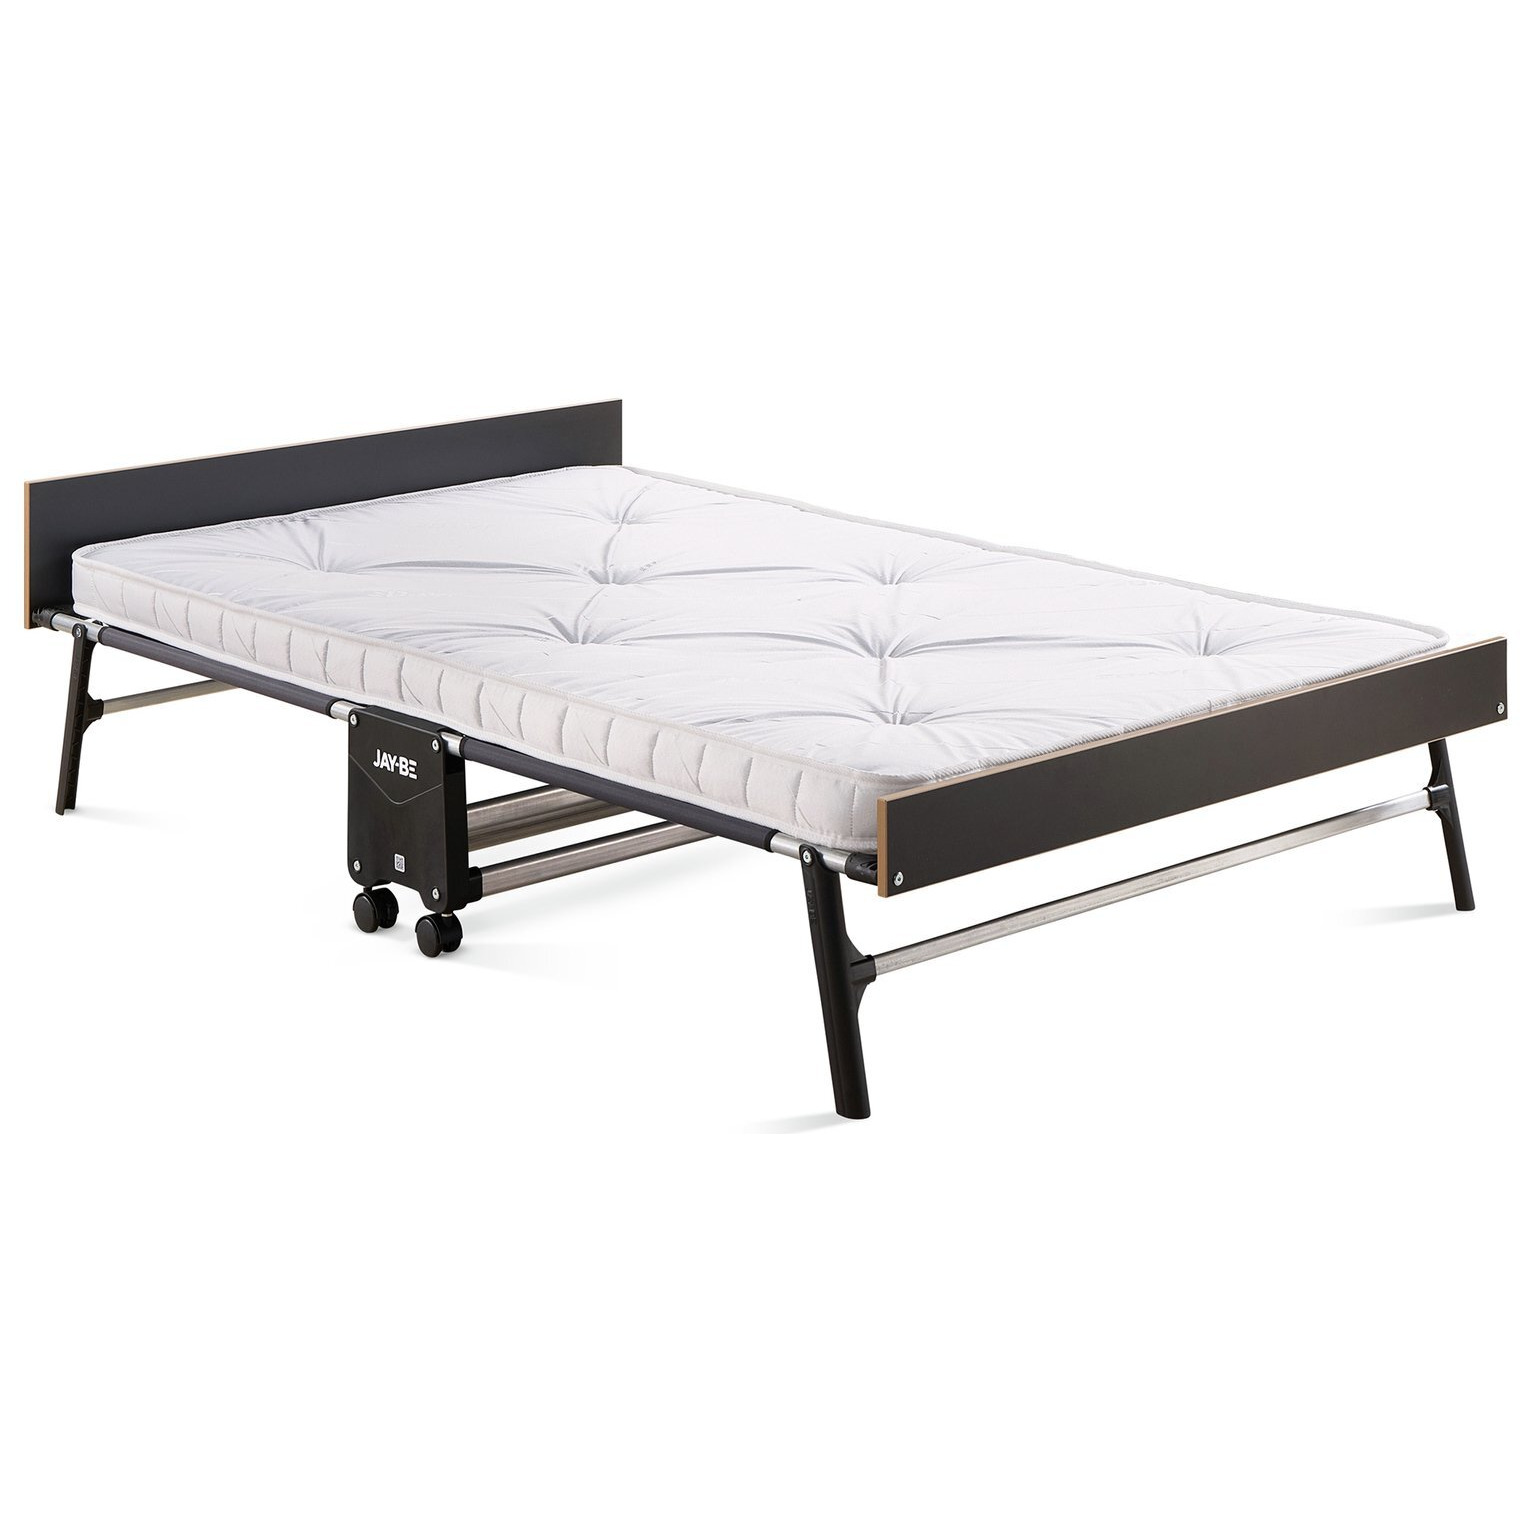 Jay-Be Grand Folding Bed with e-Pocket Mattress-Small Double - image 1